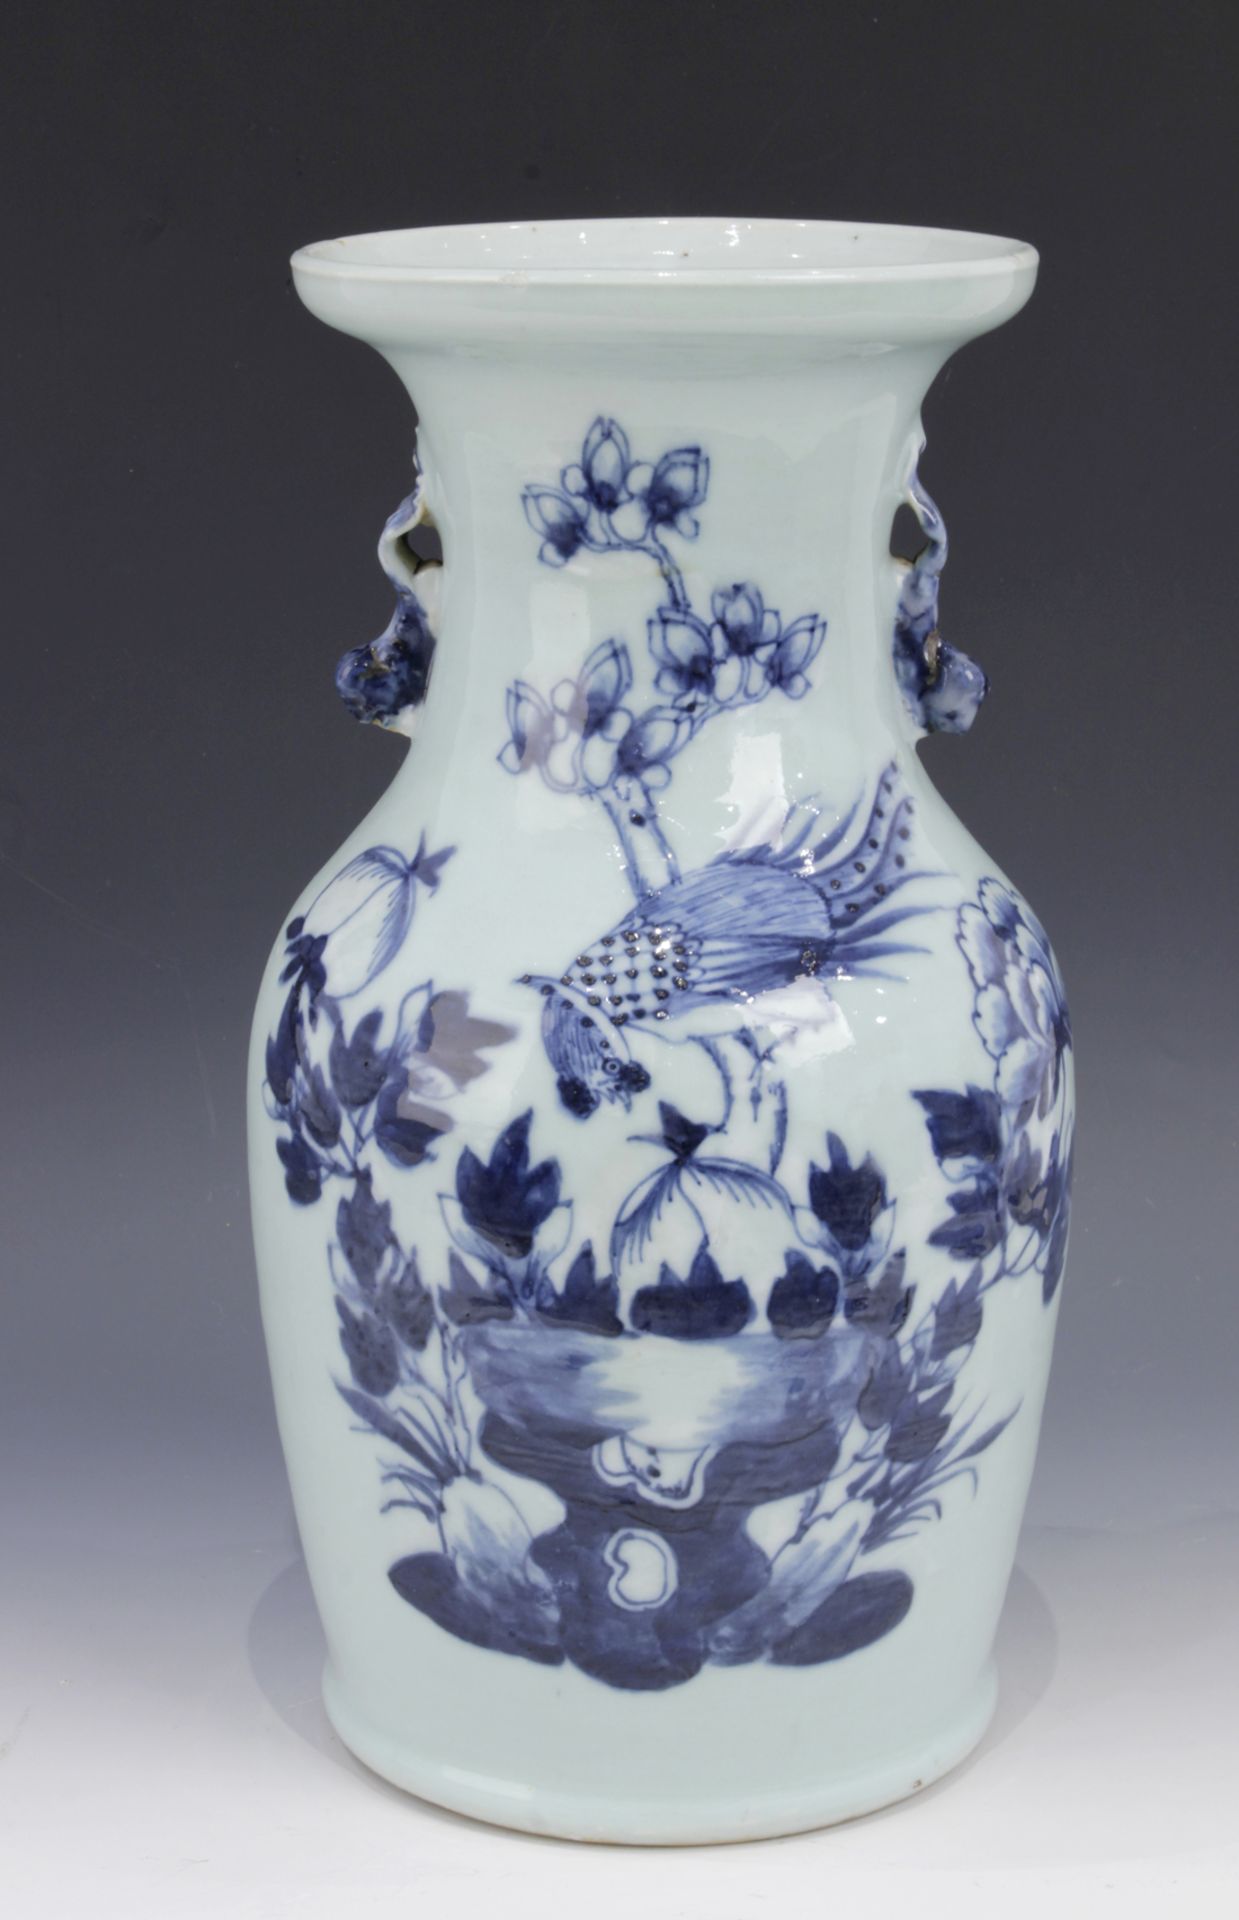 A 20th century Chinese porcelain vase